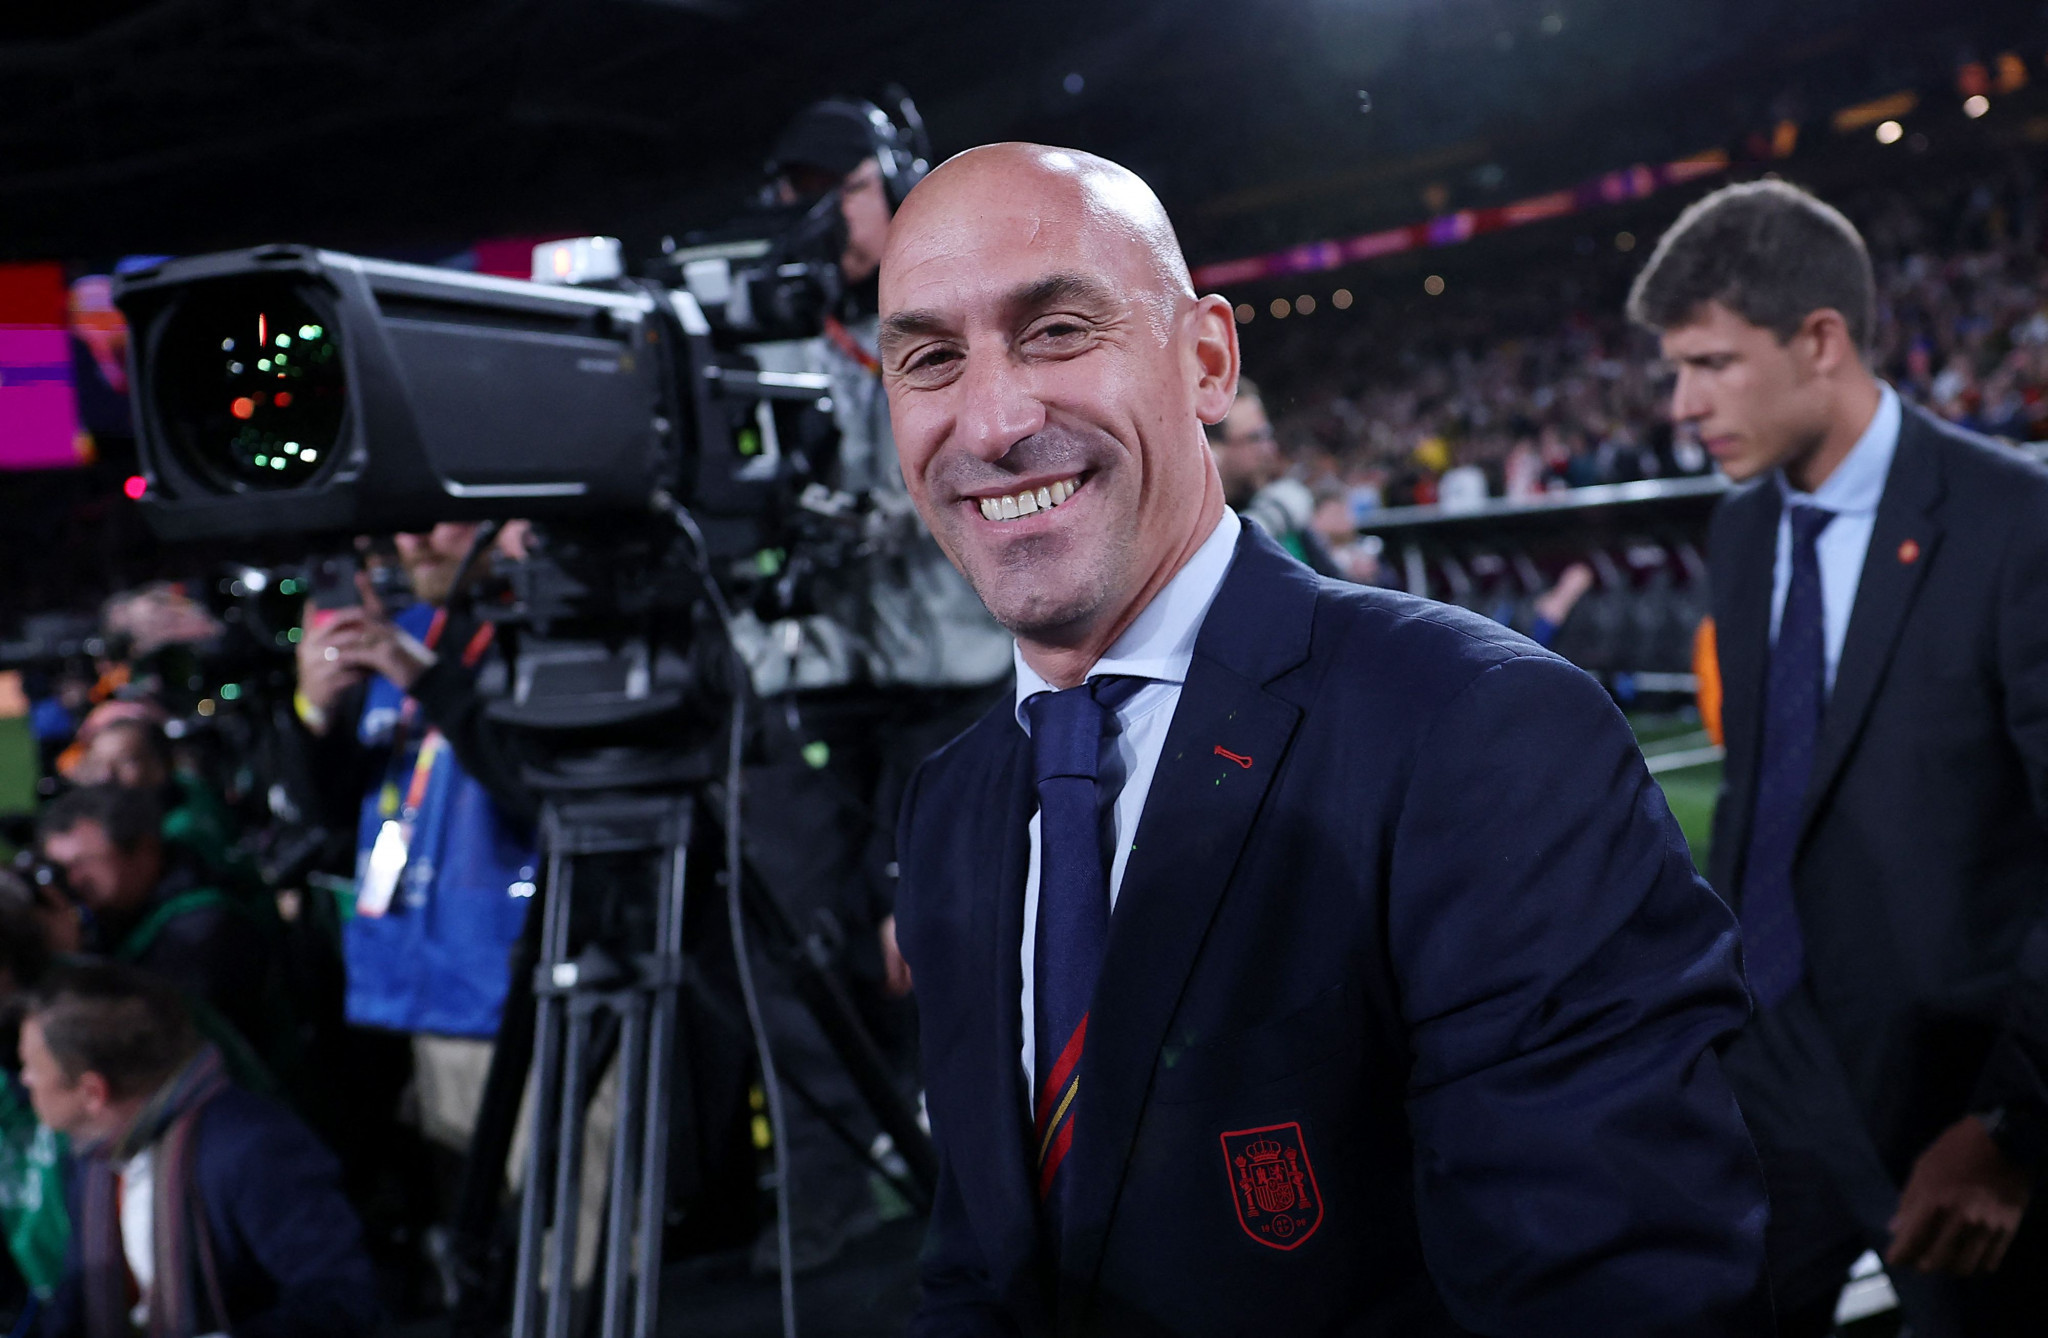 Rubiales announces resignation as Royal Spanish Football Federation President during television interview